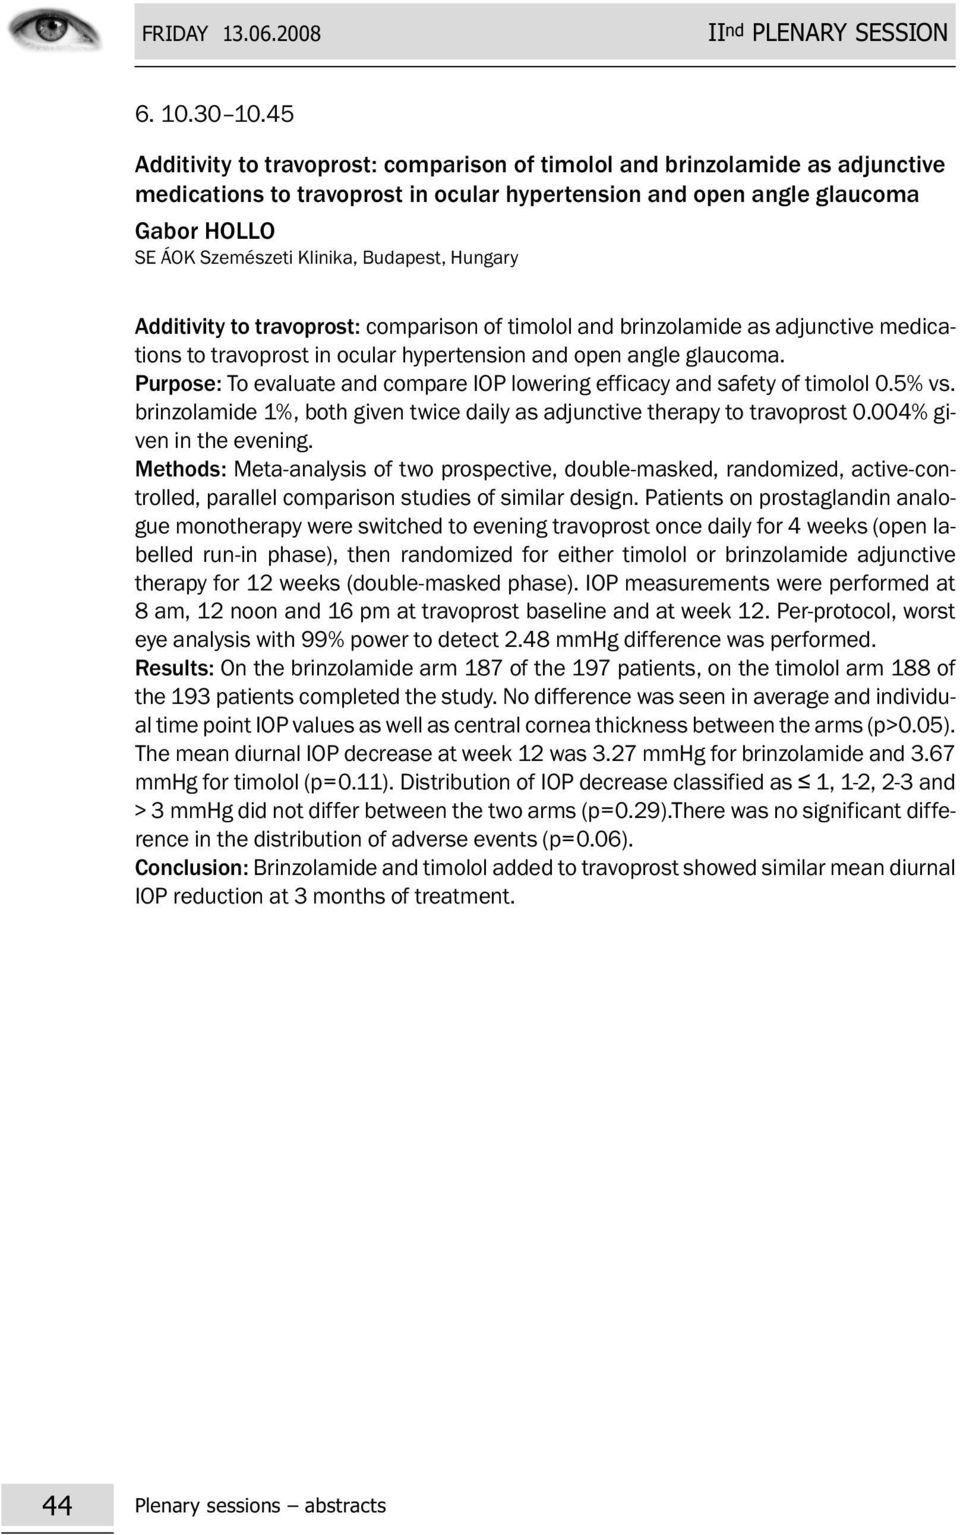 Budapest, Hungary Additivity to travoprost: comparison of timolol and brinzolamide as adjunctive medications to travoprost in ocular hypertension and open angle glaucoma.